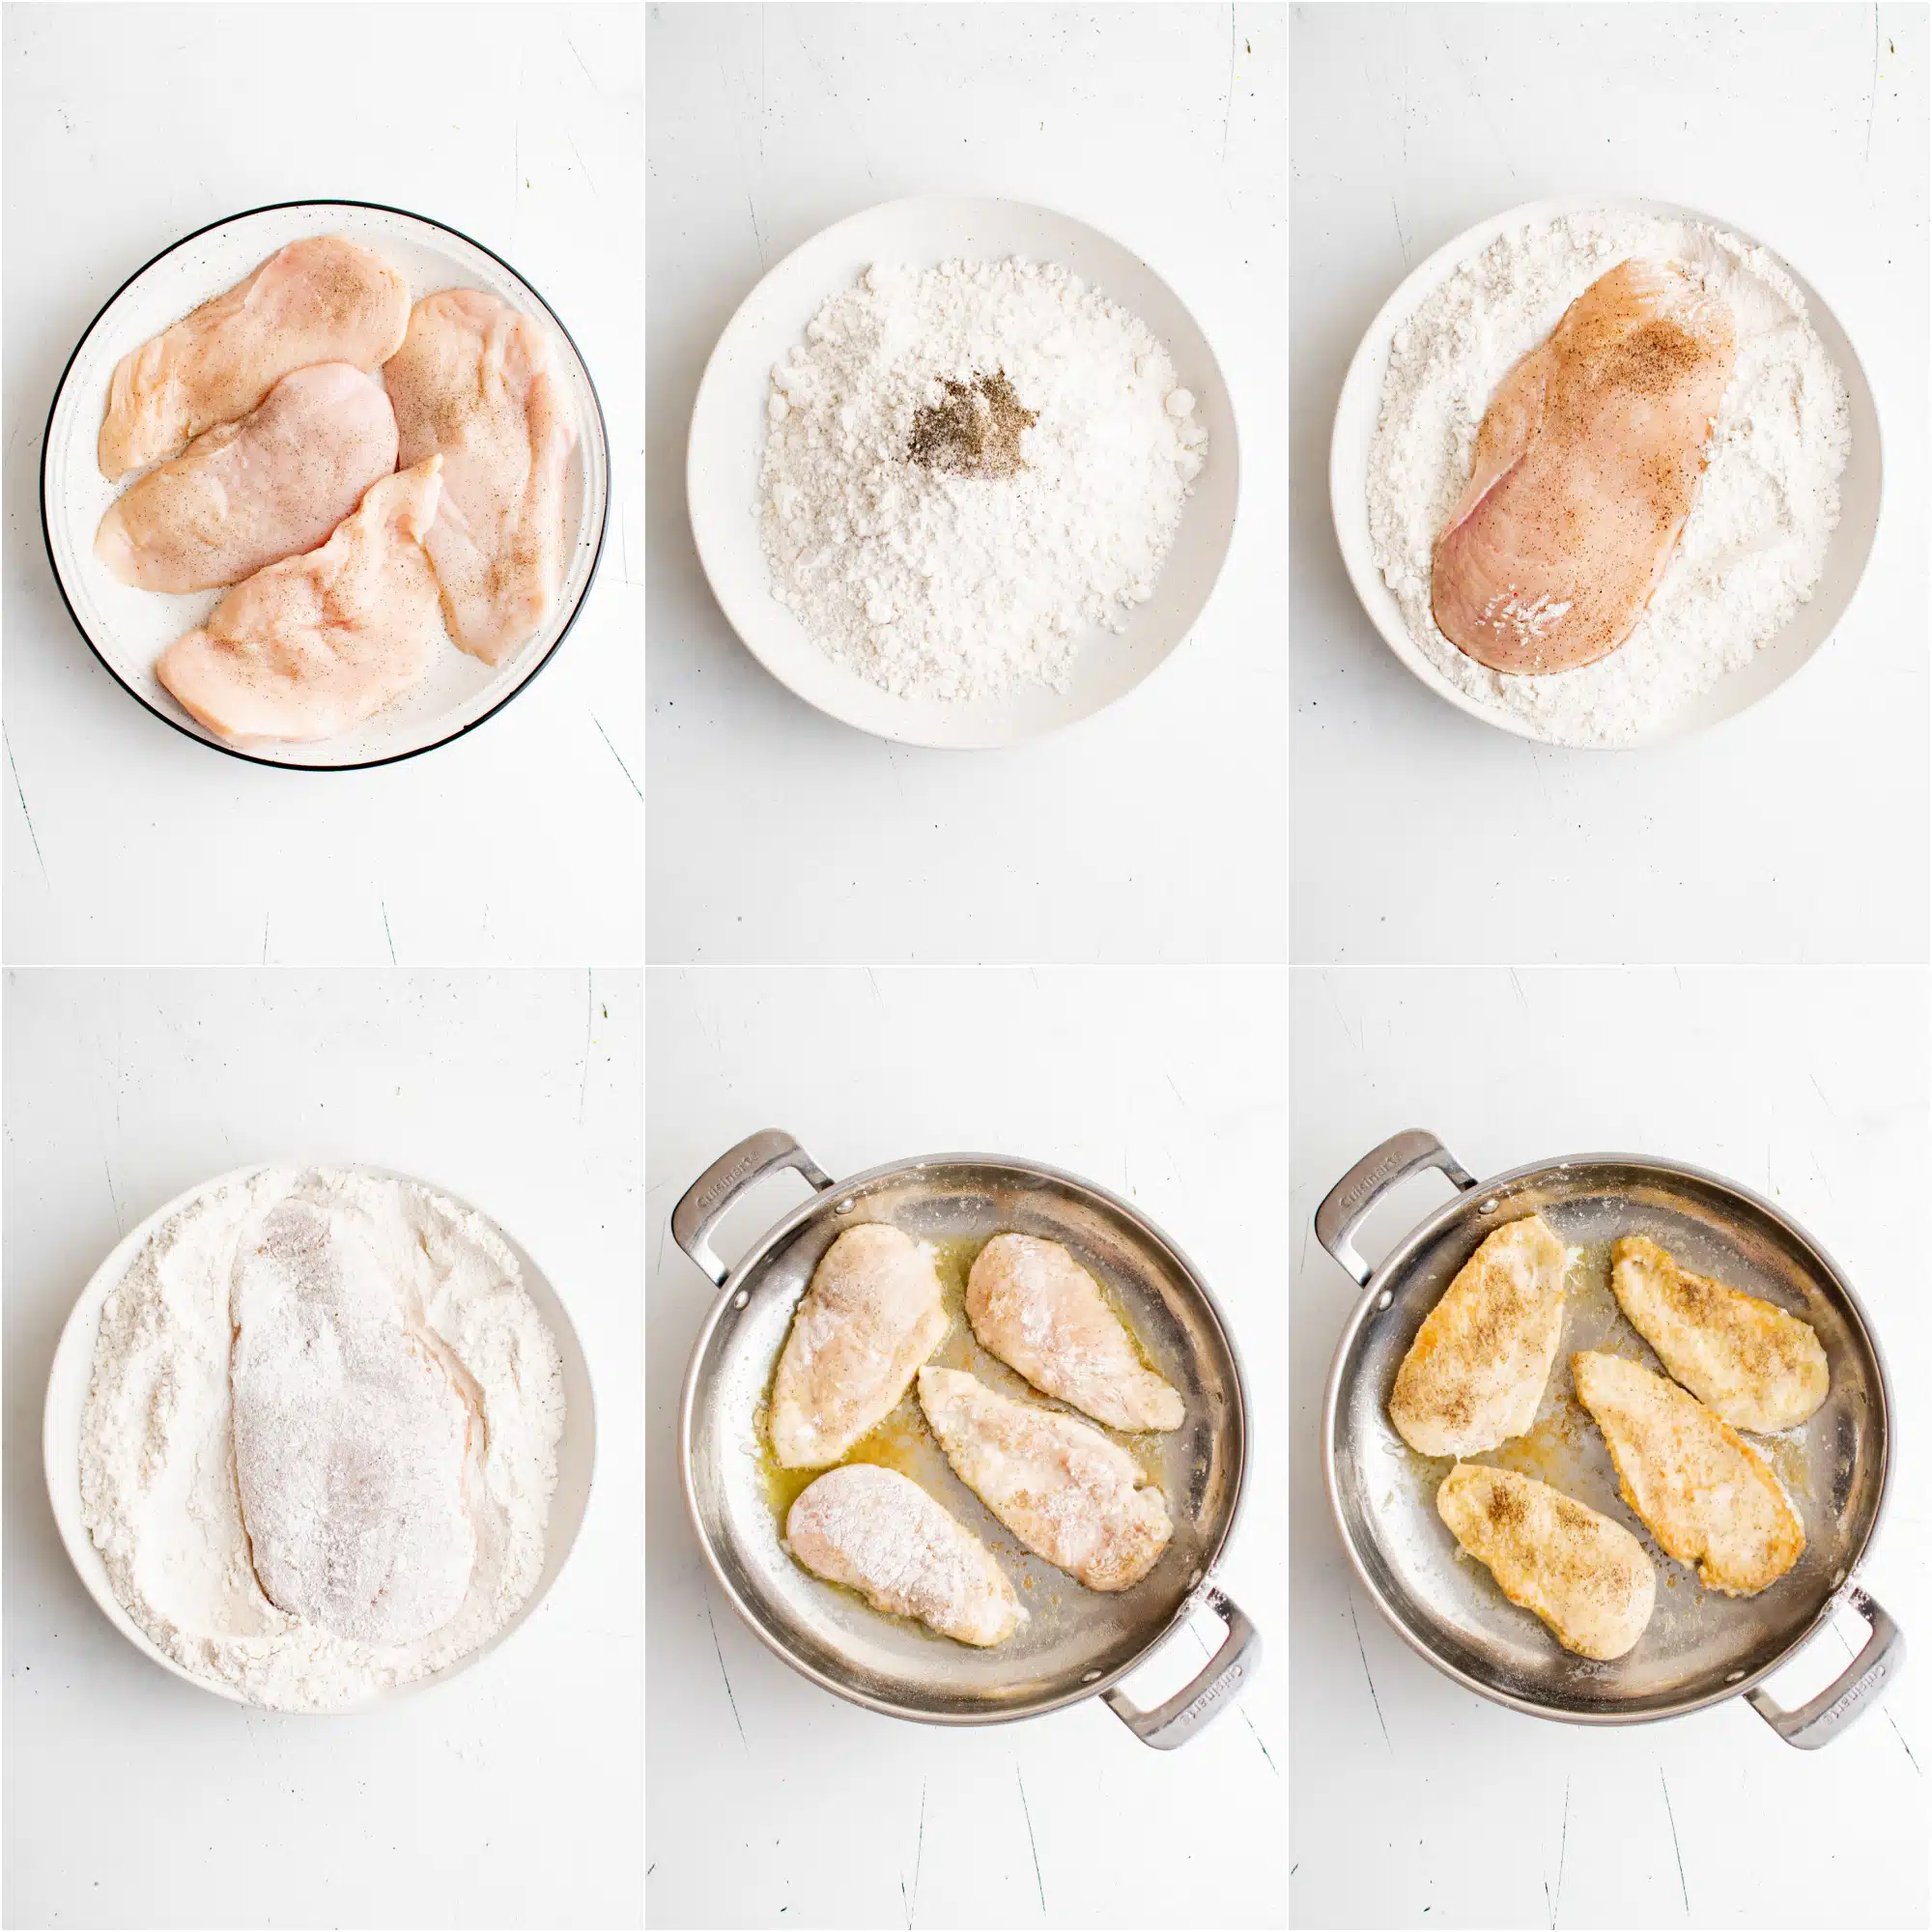 Collage with six images: image one shows a plate with four thinly sliced chicken breasts; image two shows a plate with flour and seasoning; image three shows one chicken breast placed on top of the plate that has the flour and seasoning mixture; image four shows one chicken breast covered completely in flour; image five shows four dredged chicken breasts cooking in a large stainless steel plan; image six shows four seared chicken breasts in a stainless steel pan.